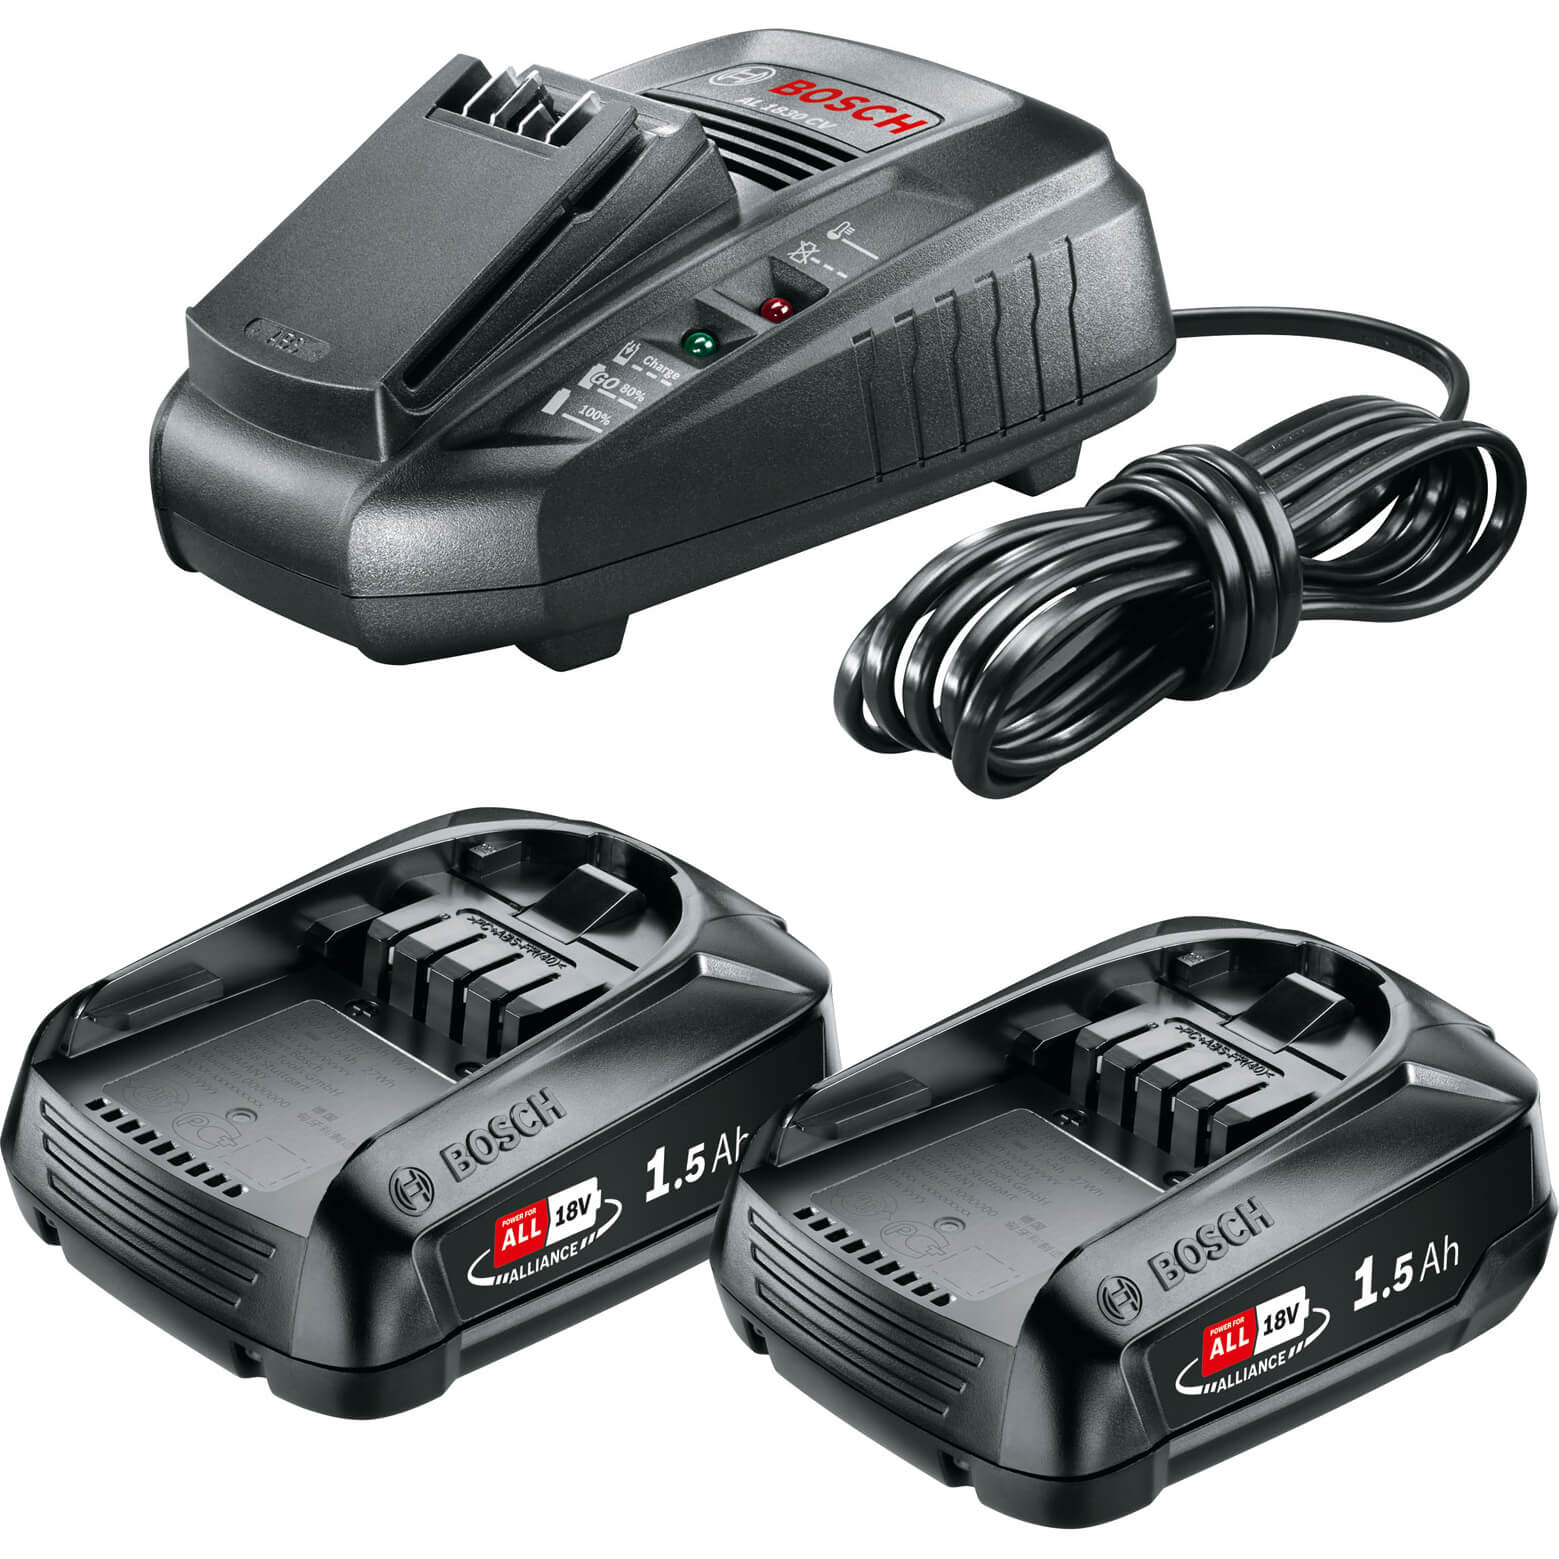 Bosch Genuine GREEN P4A 18v Cordless Li-ion Twin Battery 1.5ah and Fast Charger 1.5ah